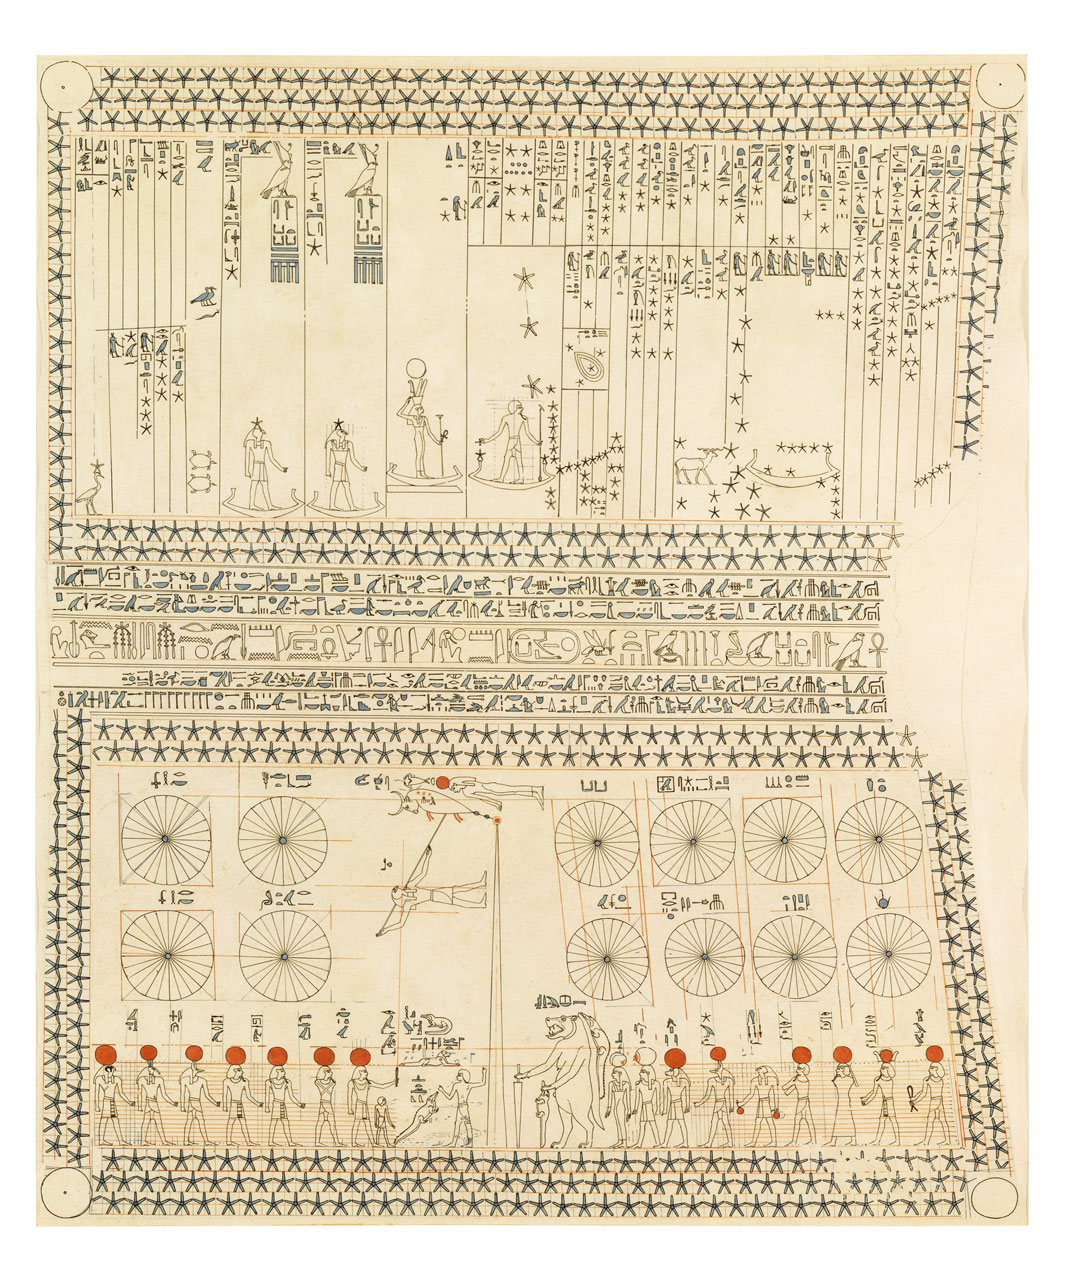 Charles K. Wilkinson, facsimile of the astronomical ceiling in the tomb of Senenmut, tempera on paper, original c.1479–1458 BC. Courtesy of Rogers Fund, 1948. As reproduced in Sun and Moon